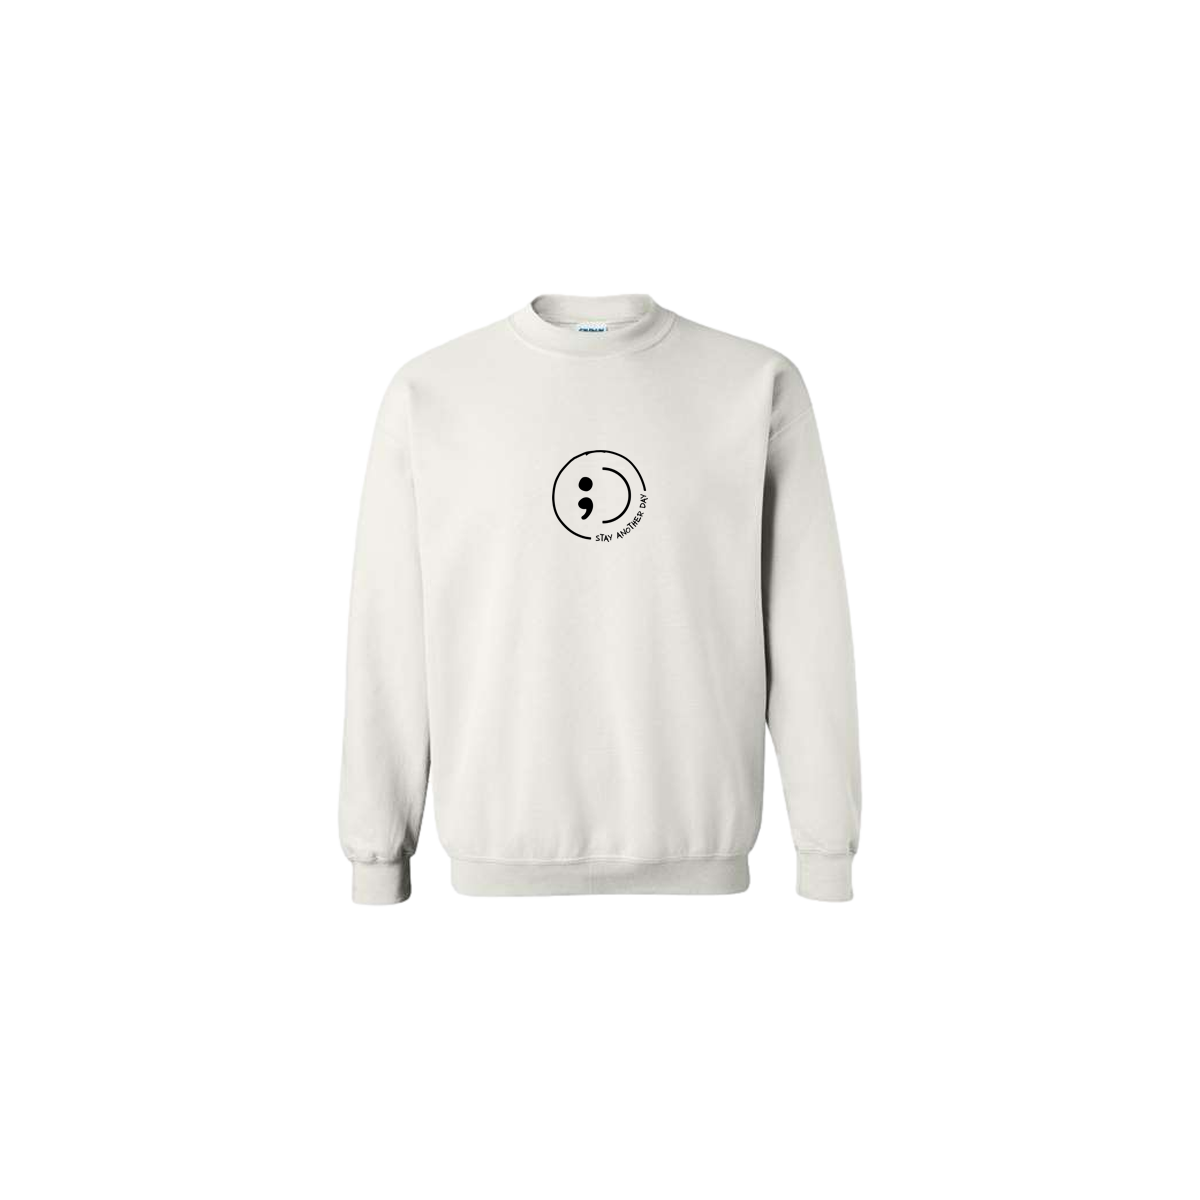 Stay Another Day Smiley with text Embroidered White Crewneck - Mental Health Awareness Clothing